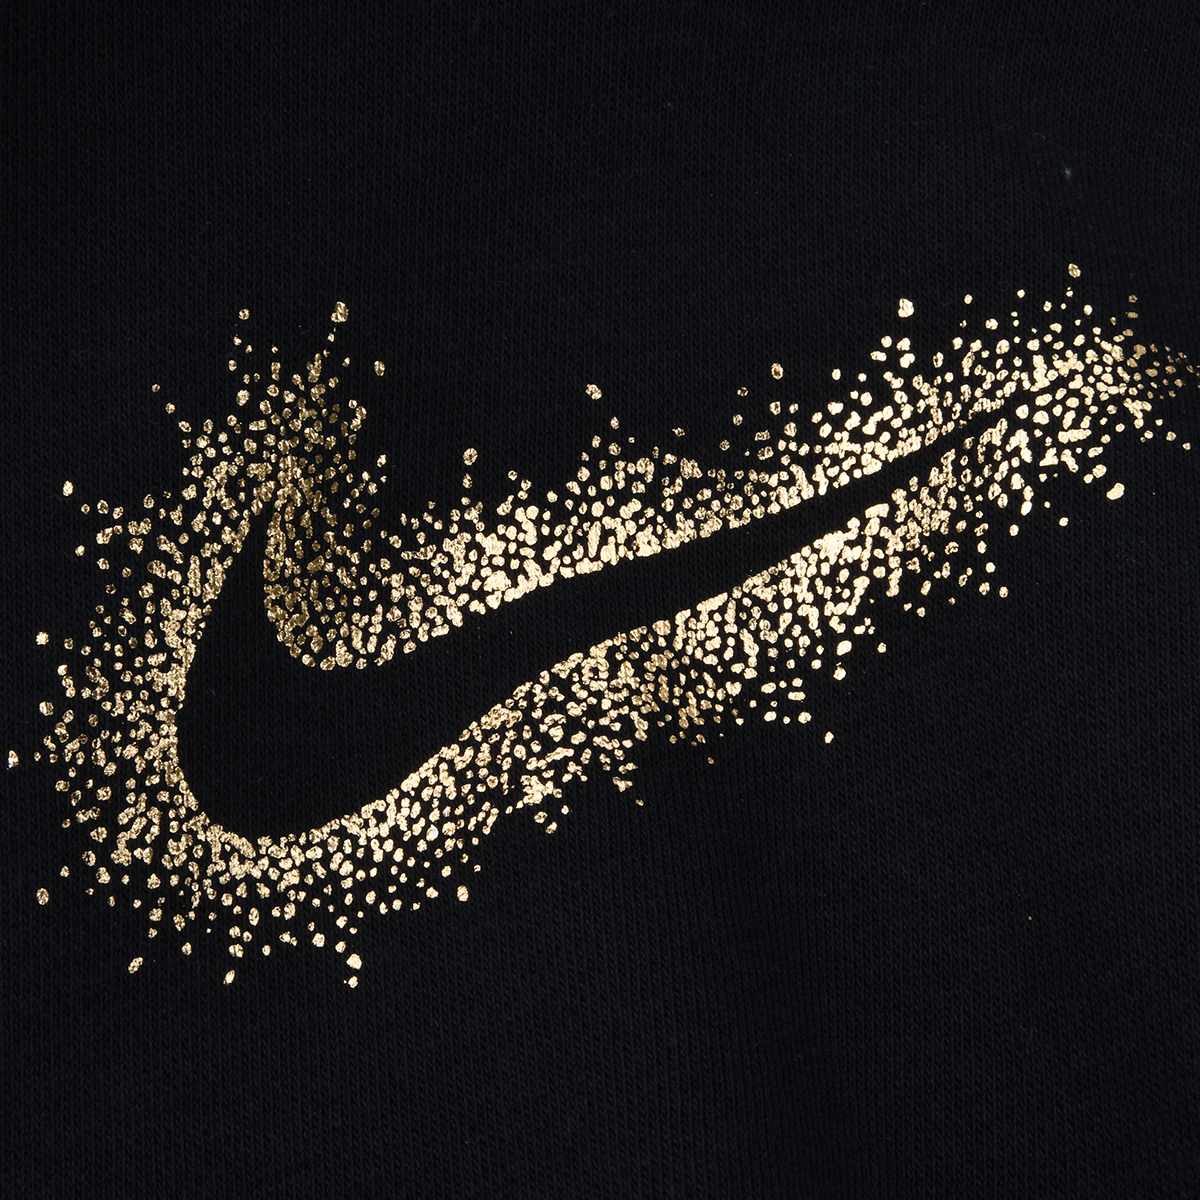 Buzo Nike Club Fleece Mujer,  image number null